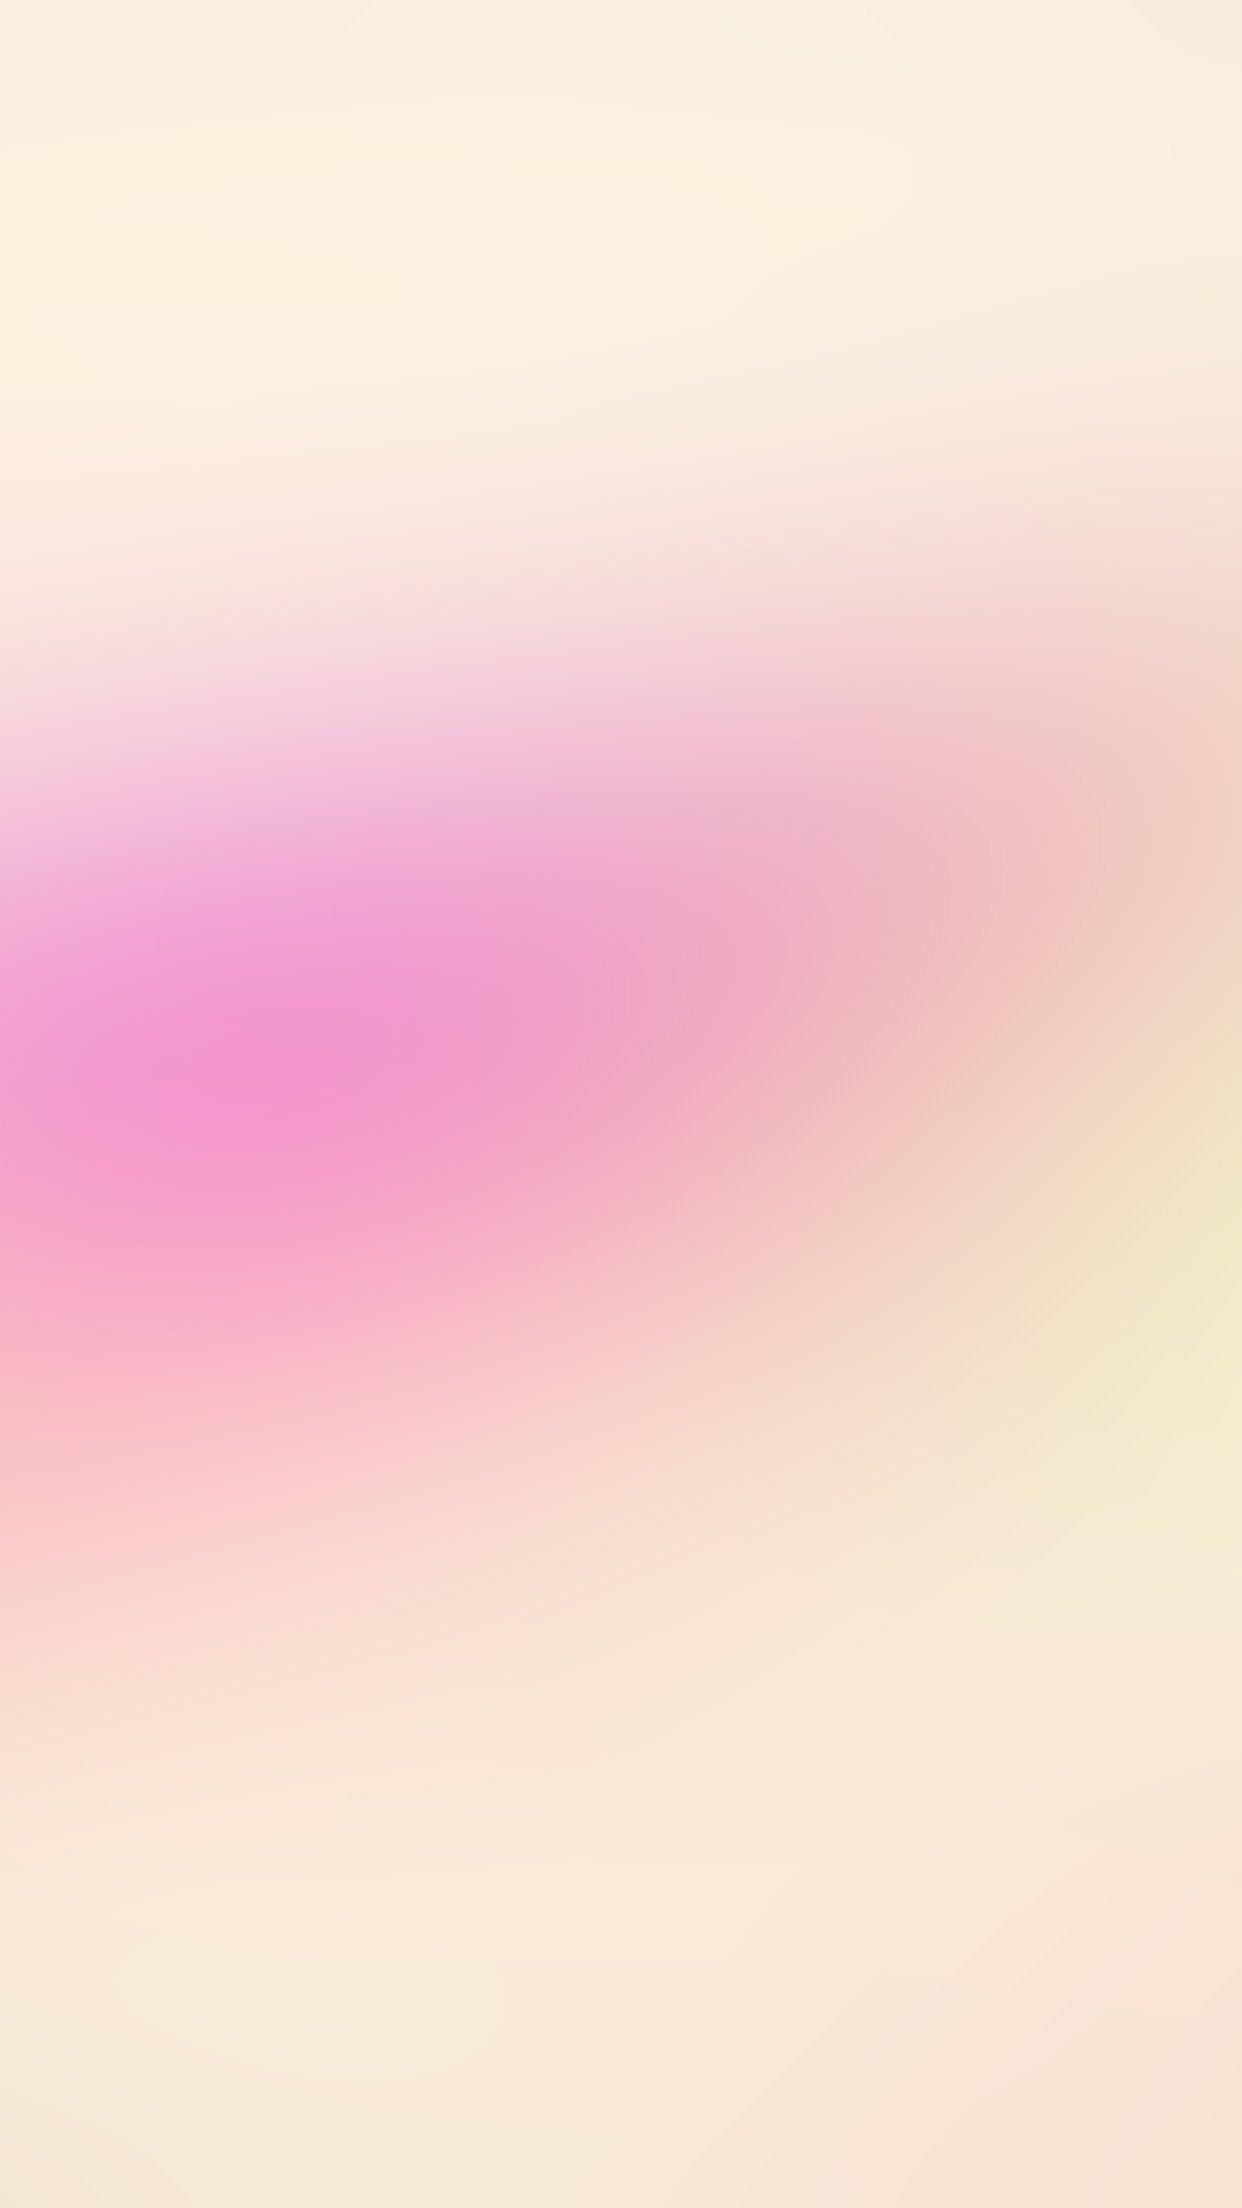 Pastel iPhone 6 Wallpapers - Top Free Pastel iPhone 6 Backgrounds ...